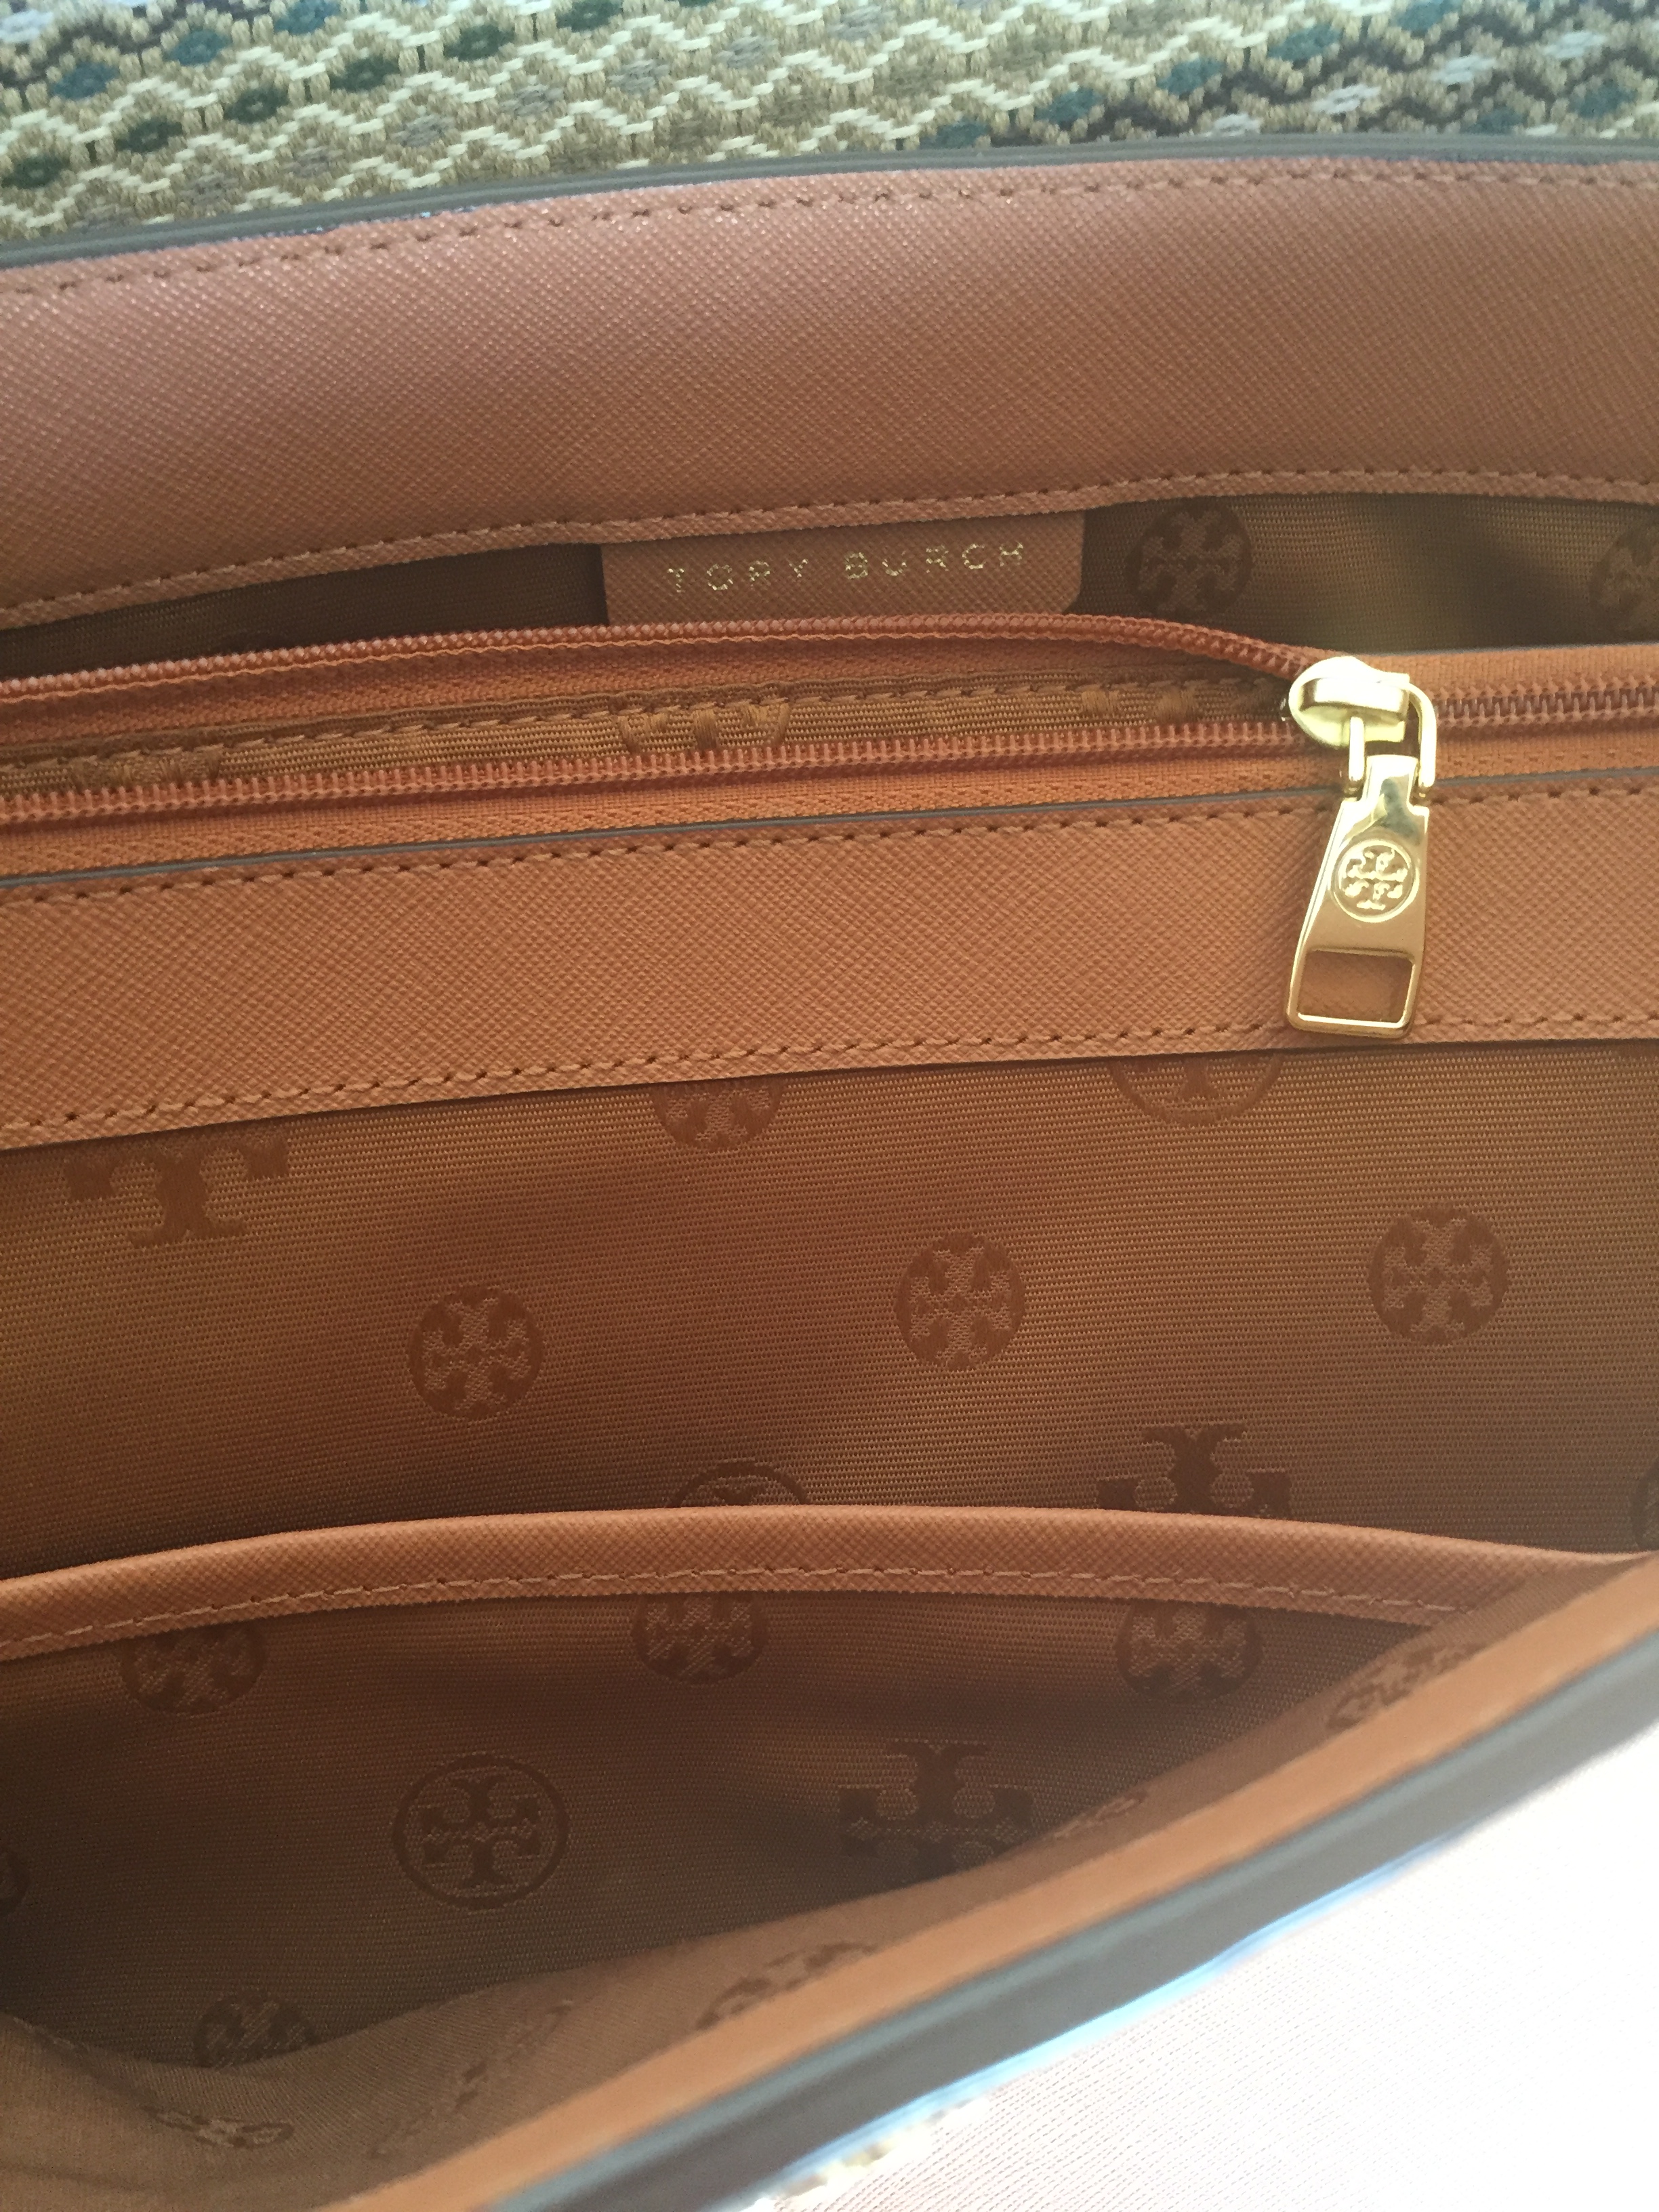 Tory+Burch+Small+York+Saffiano+Leather+Buckle+Tote+Black for sale